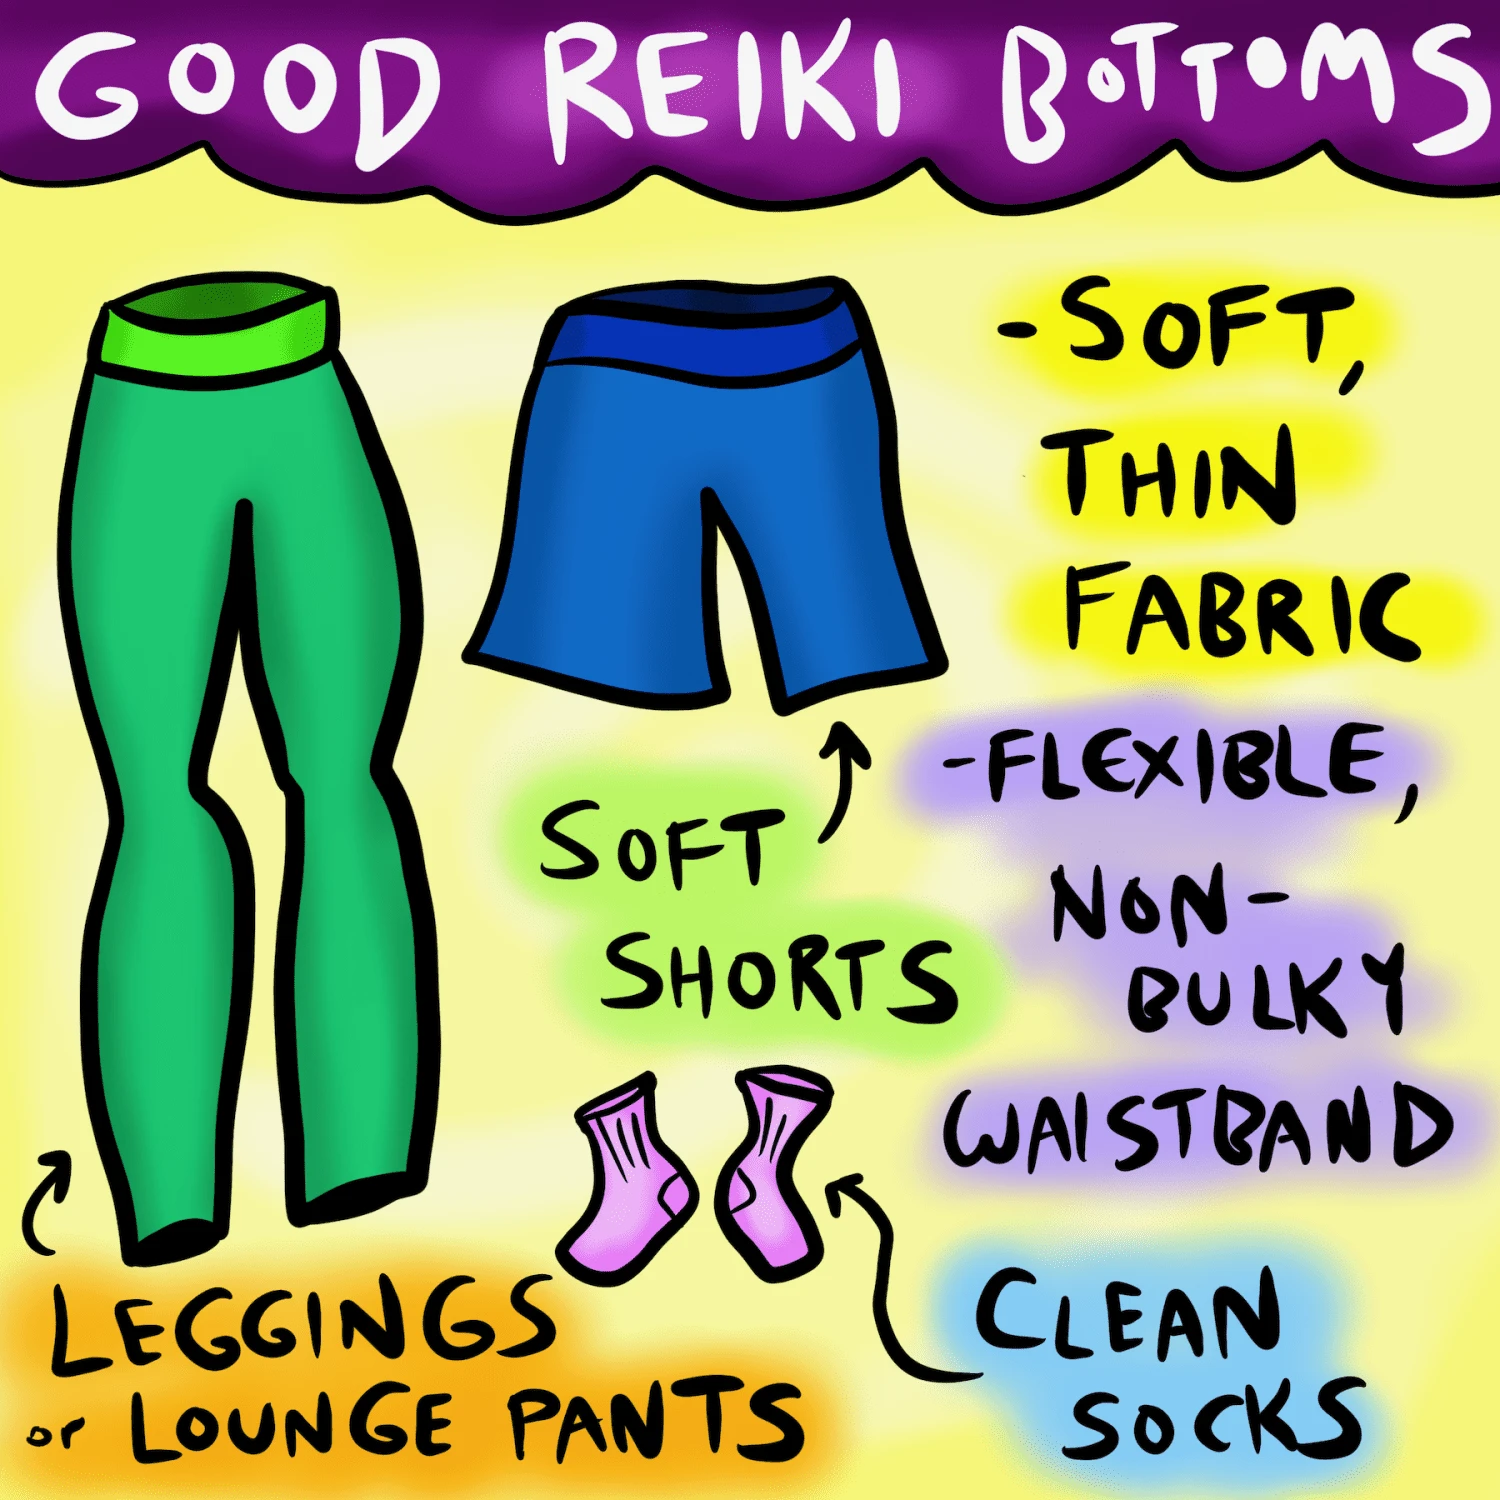 What to wear for Reiki: Bottoms.